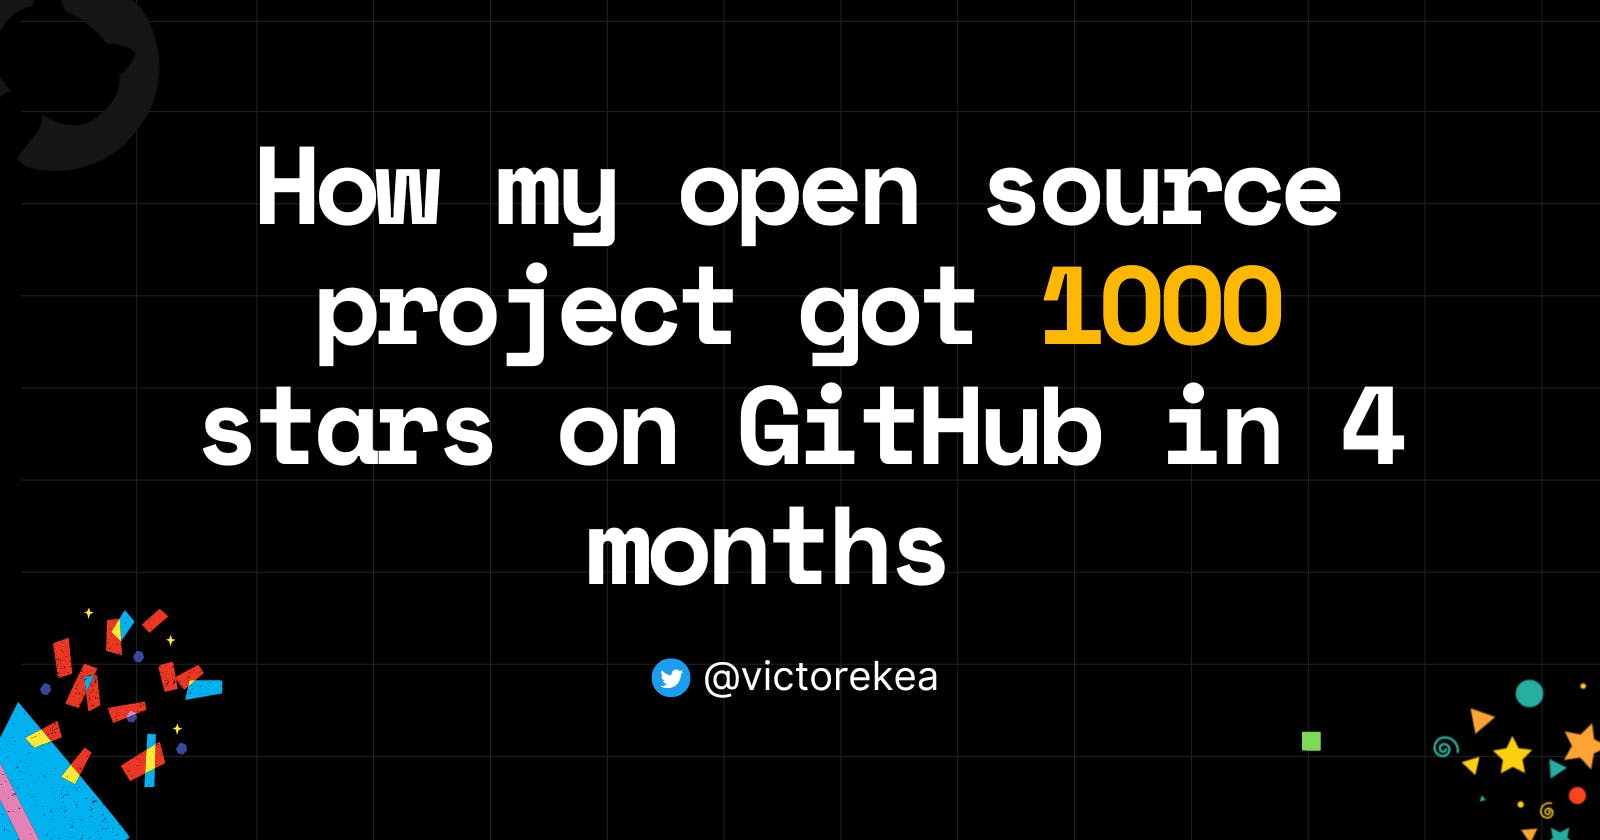 How my open source project got 1000 stars on GitHub in 4 months